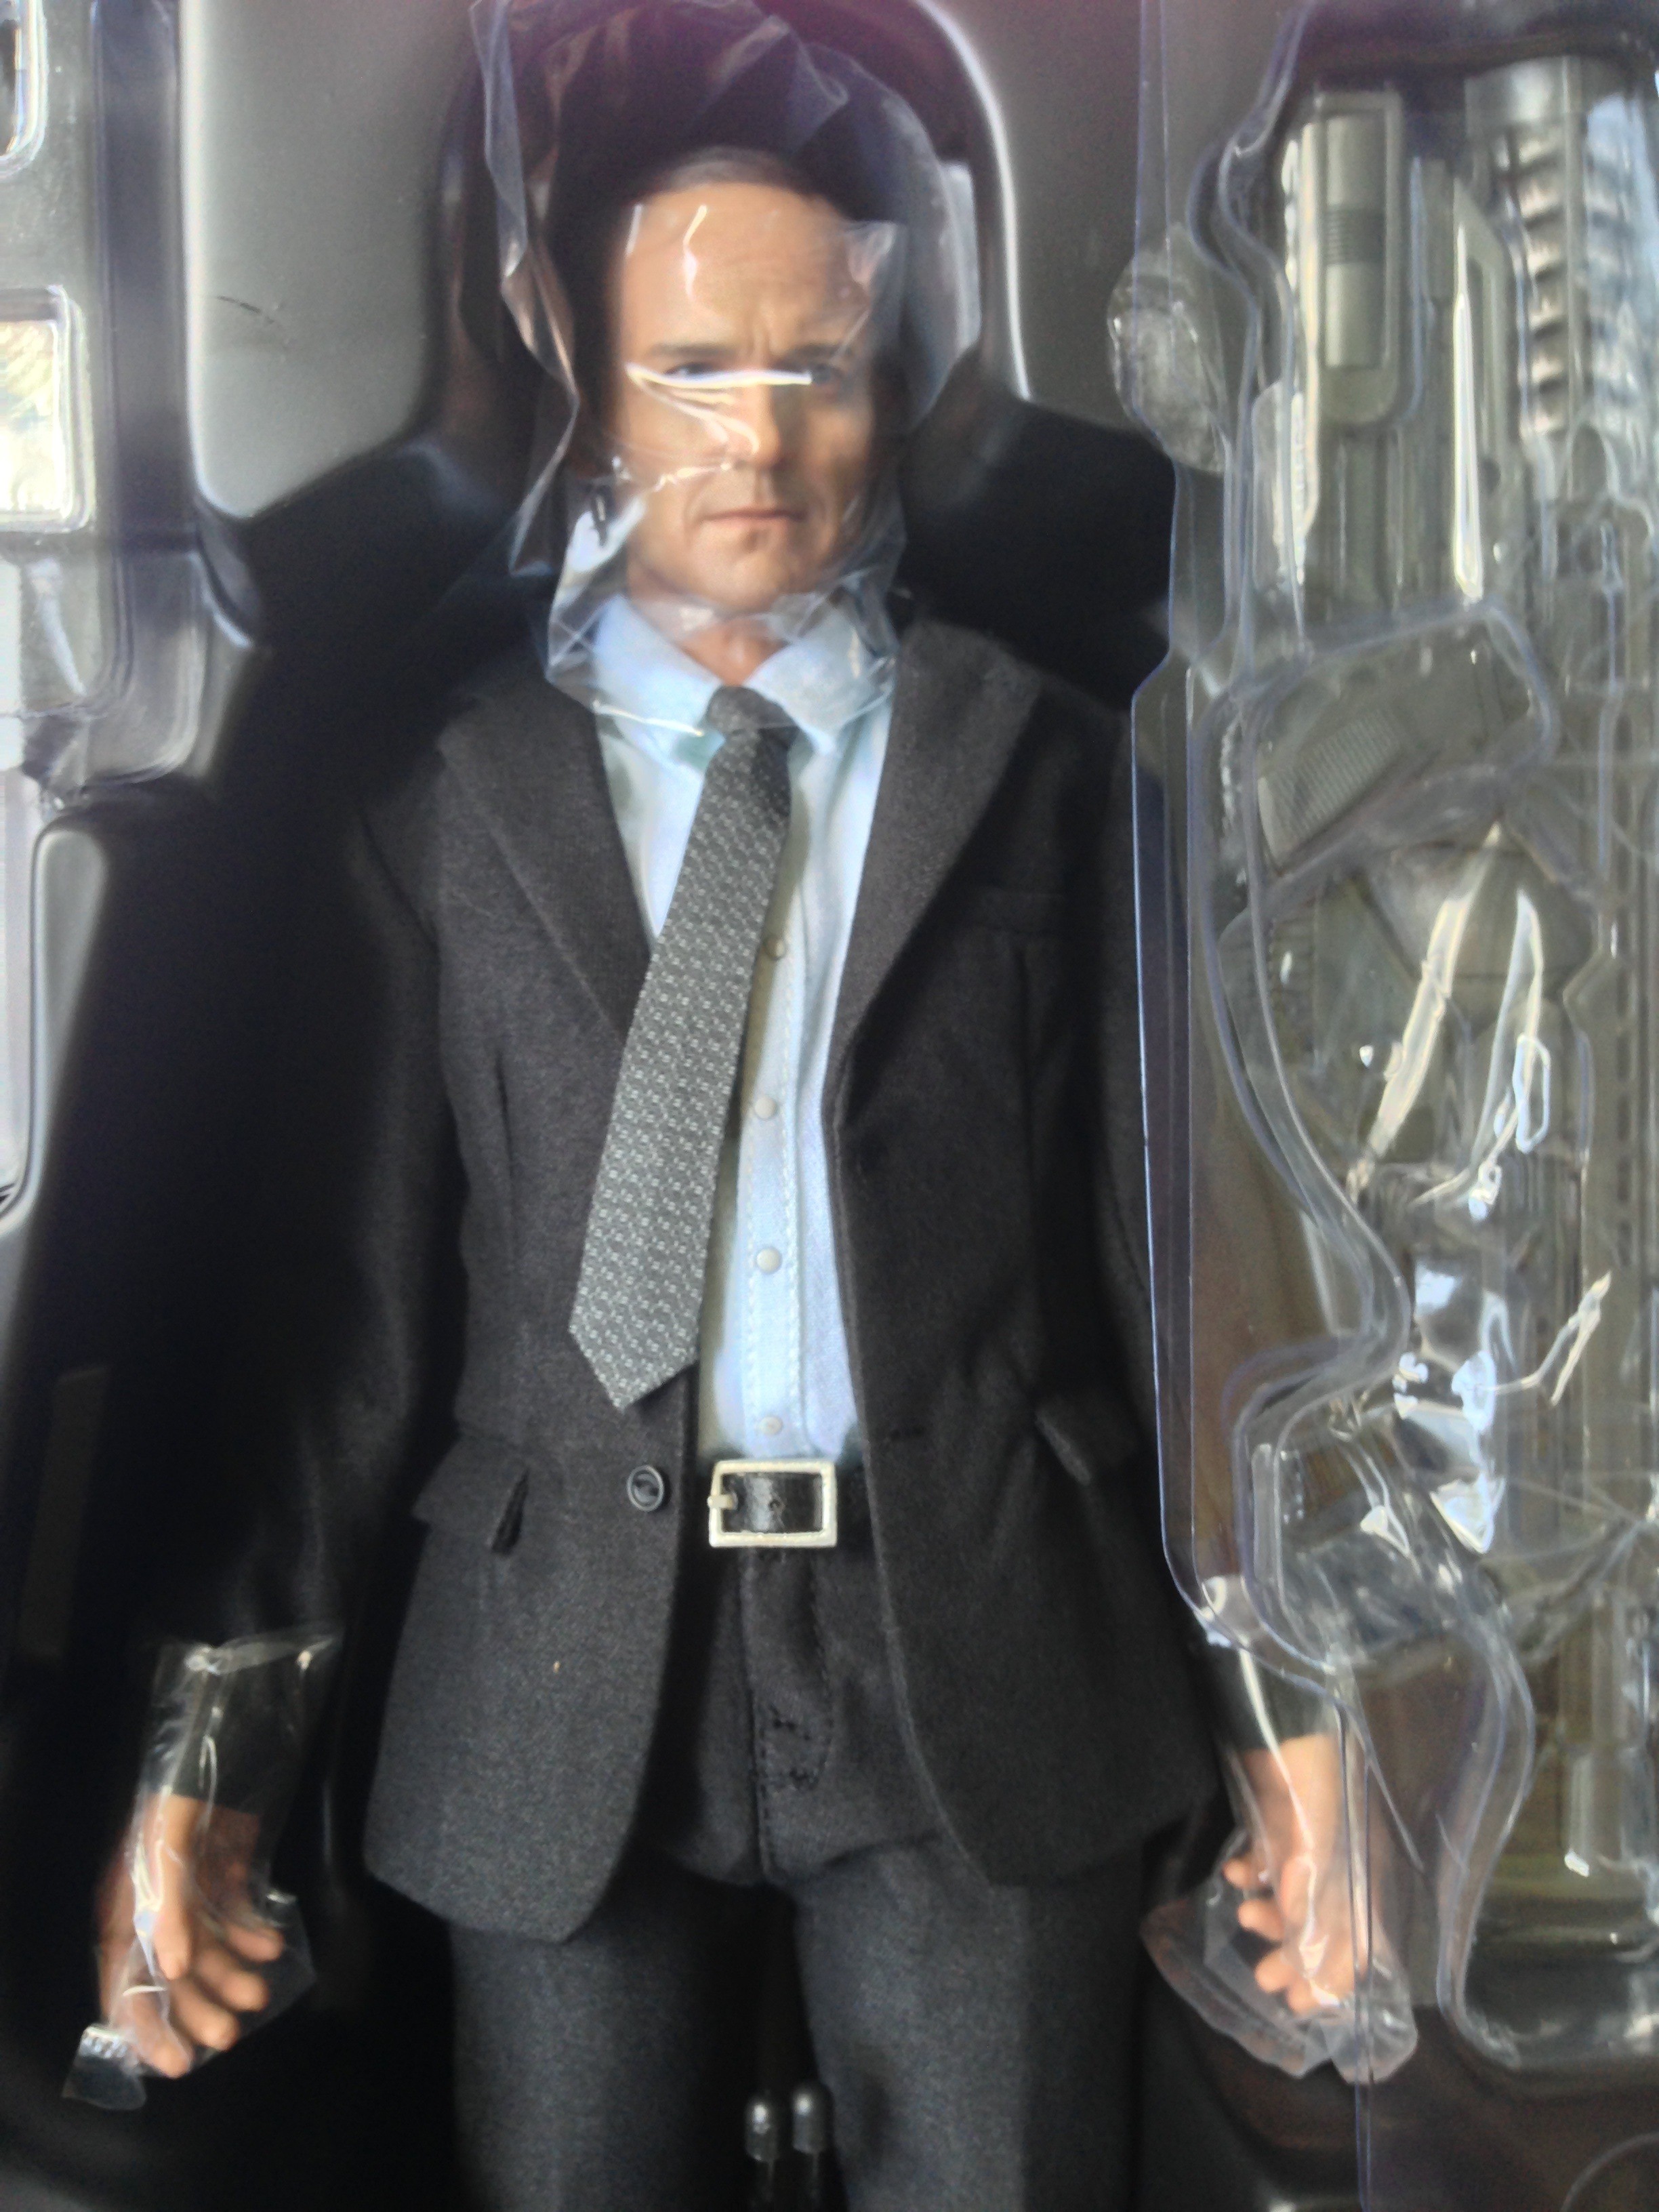 Avengers Hot Toys Agent Phil Coulson Sixth-Scale Figure Released